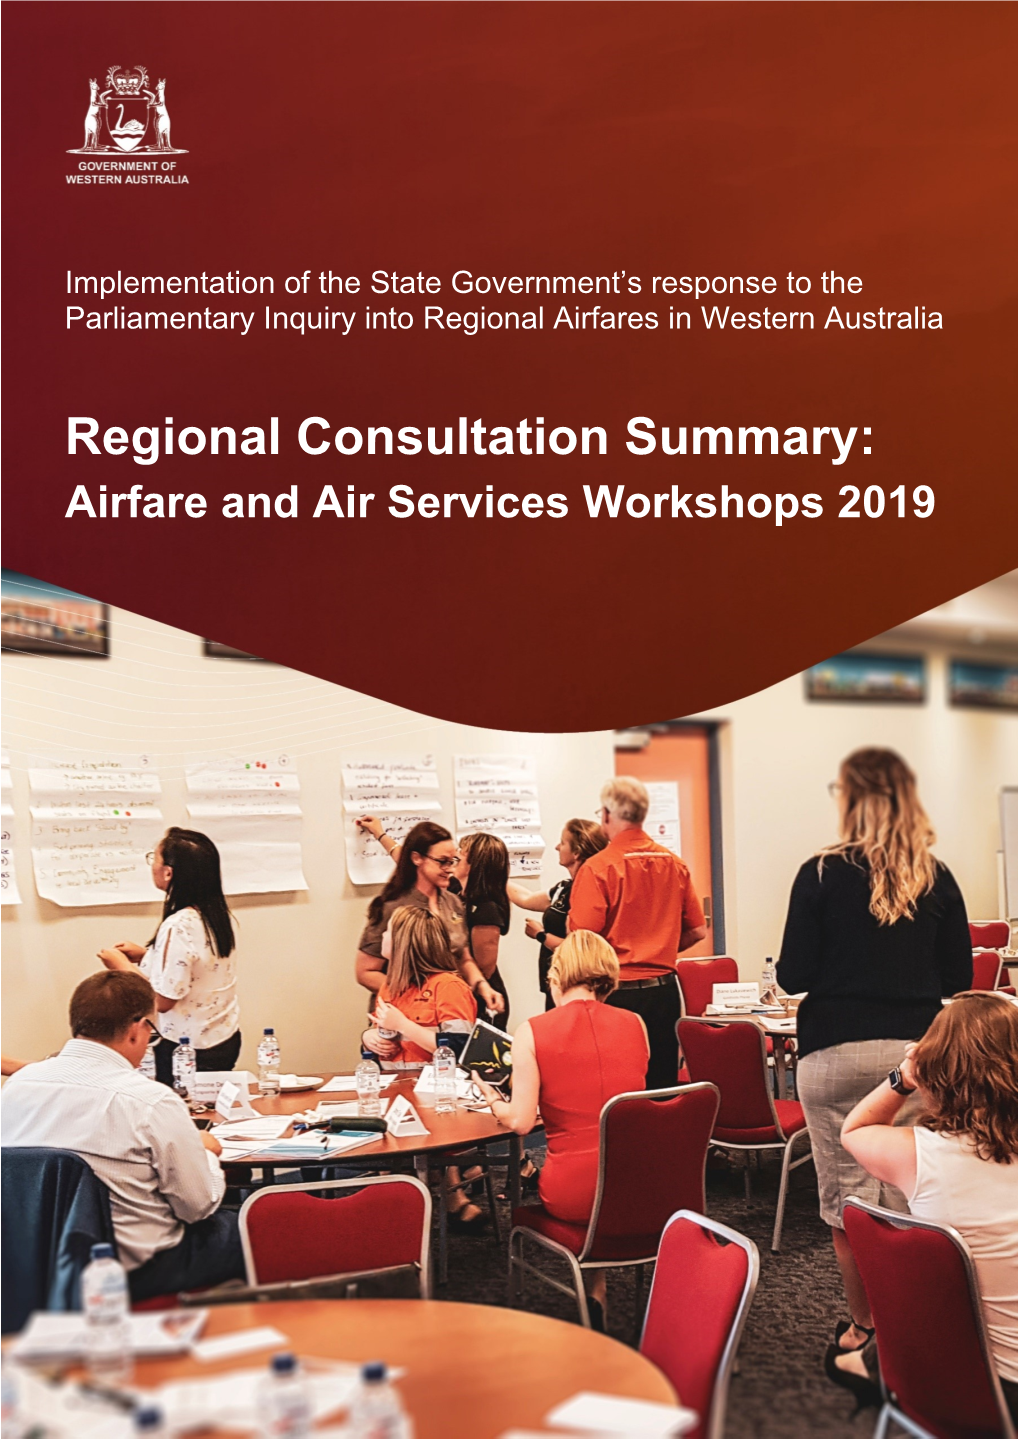 Airfare and Air Services Workshops 2019